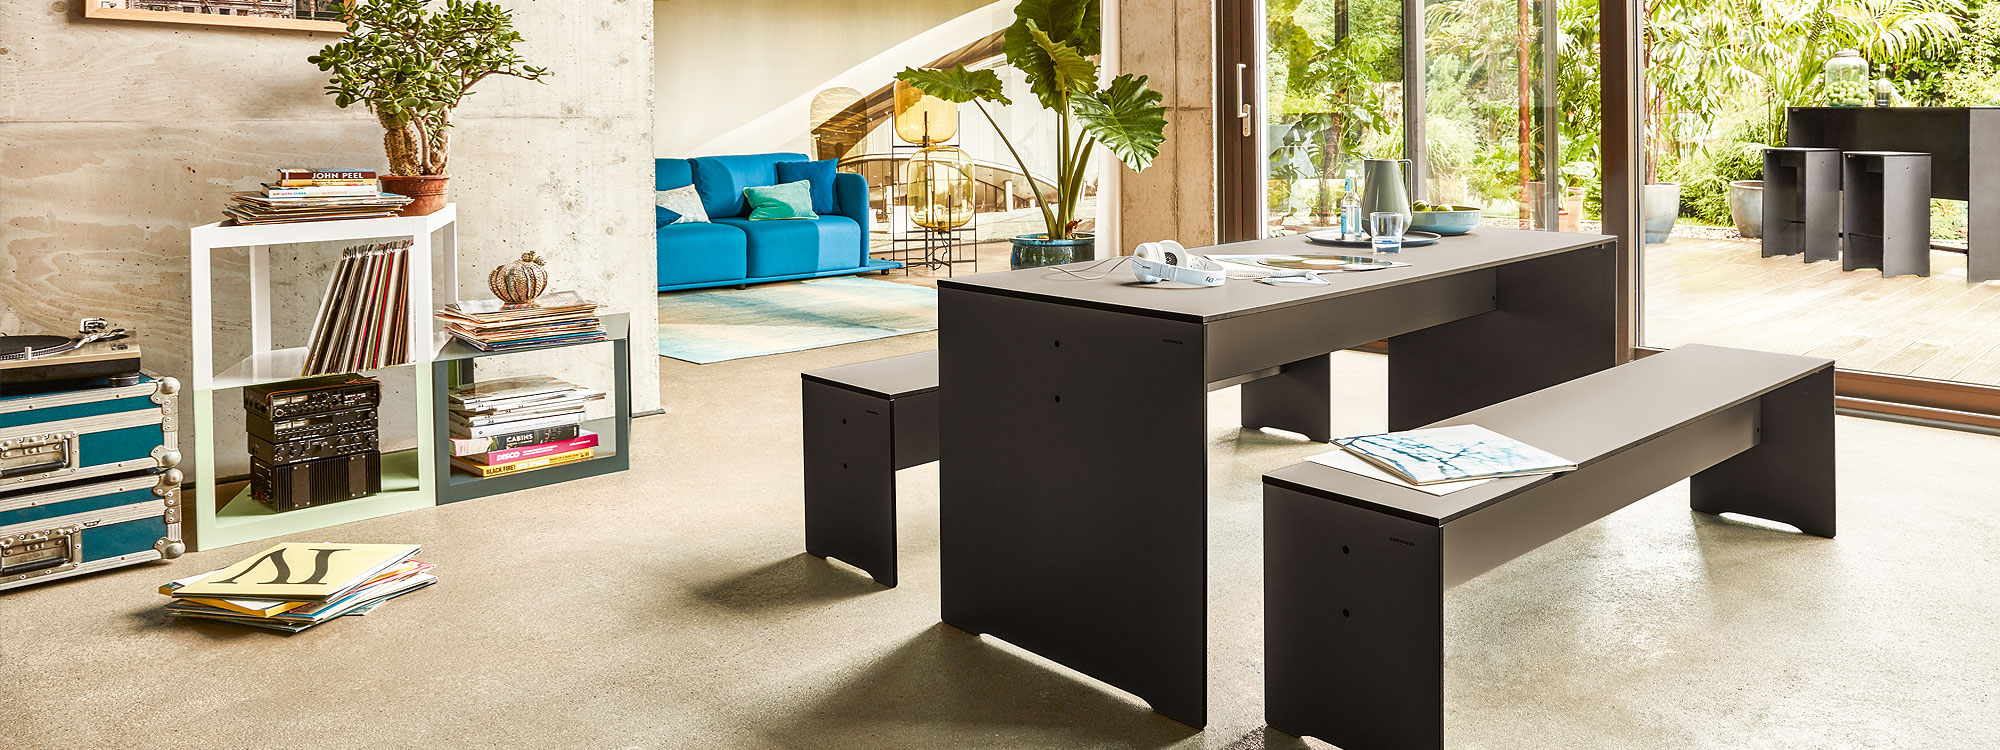 RIVA Modern Table And Benches Designed By Marie Smid-Schweiger. MINIMALIST Garden DINING Furniture Is Ideal Modern Picnic Furniture As Well As Restaurant Tables And Benches. By Conmoto GERMAN Designer Garden FURNITURE.